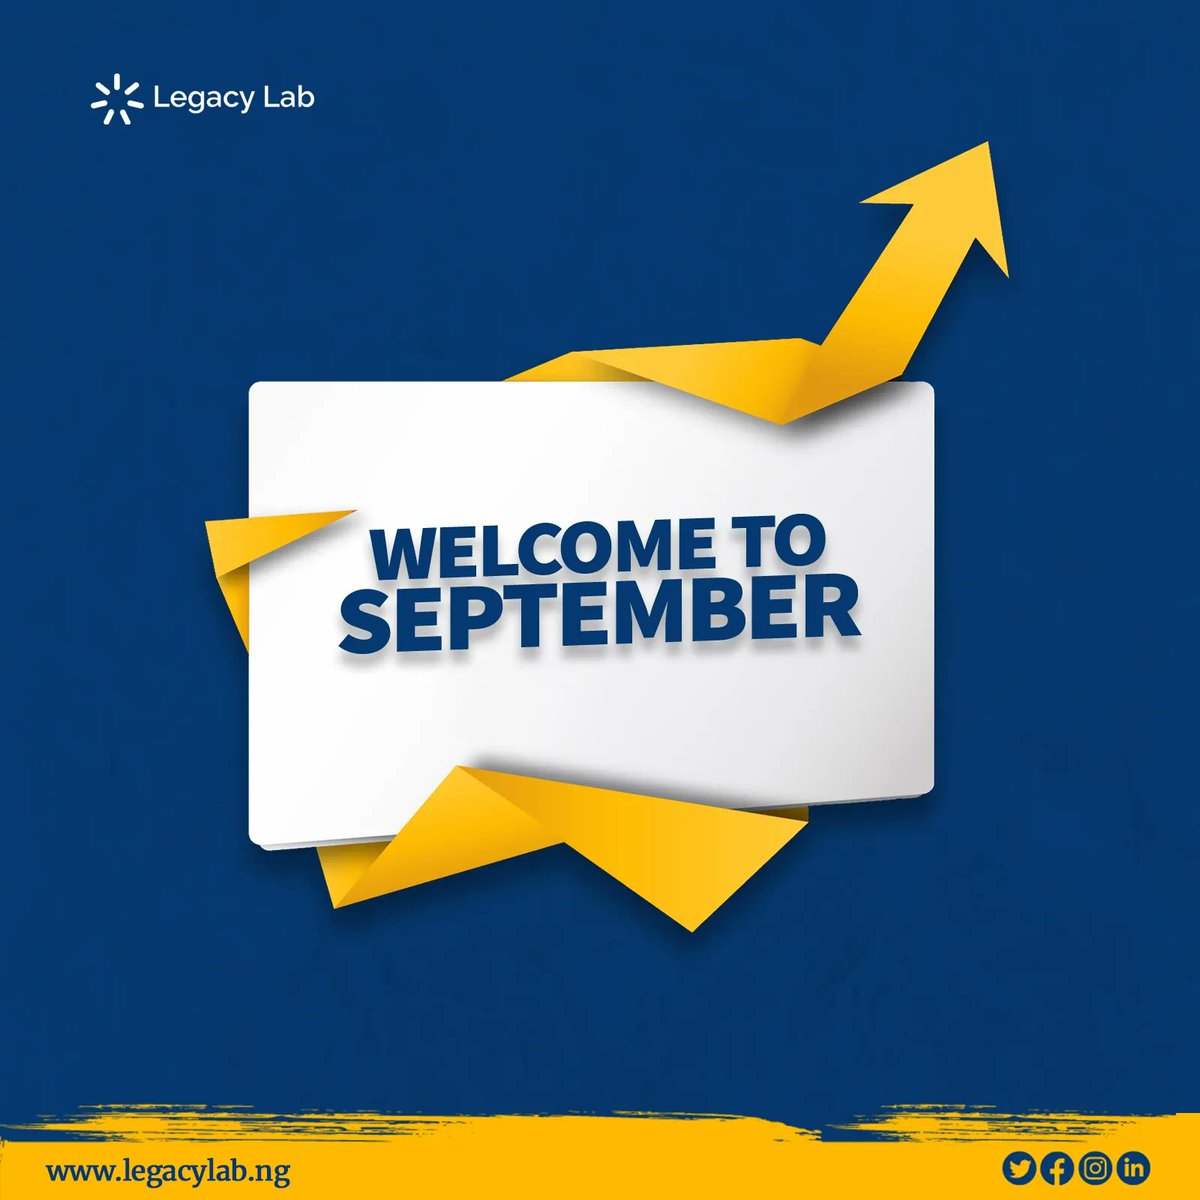 Here's to a month filled with inspiring ideas, relentless determination, and boundless creativity! 
#NewMonth #InnovationEcosystem #TechCommunity #LimitlessPossibilities #LegacyLab